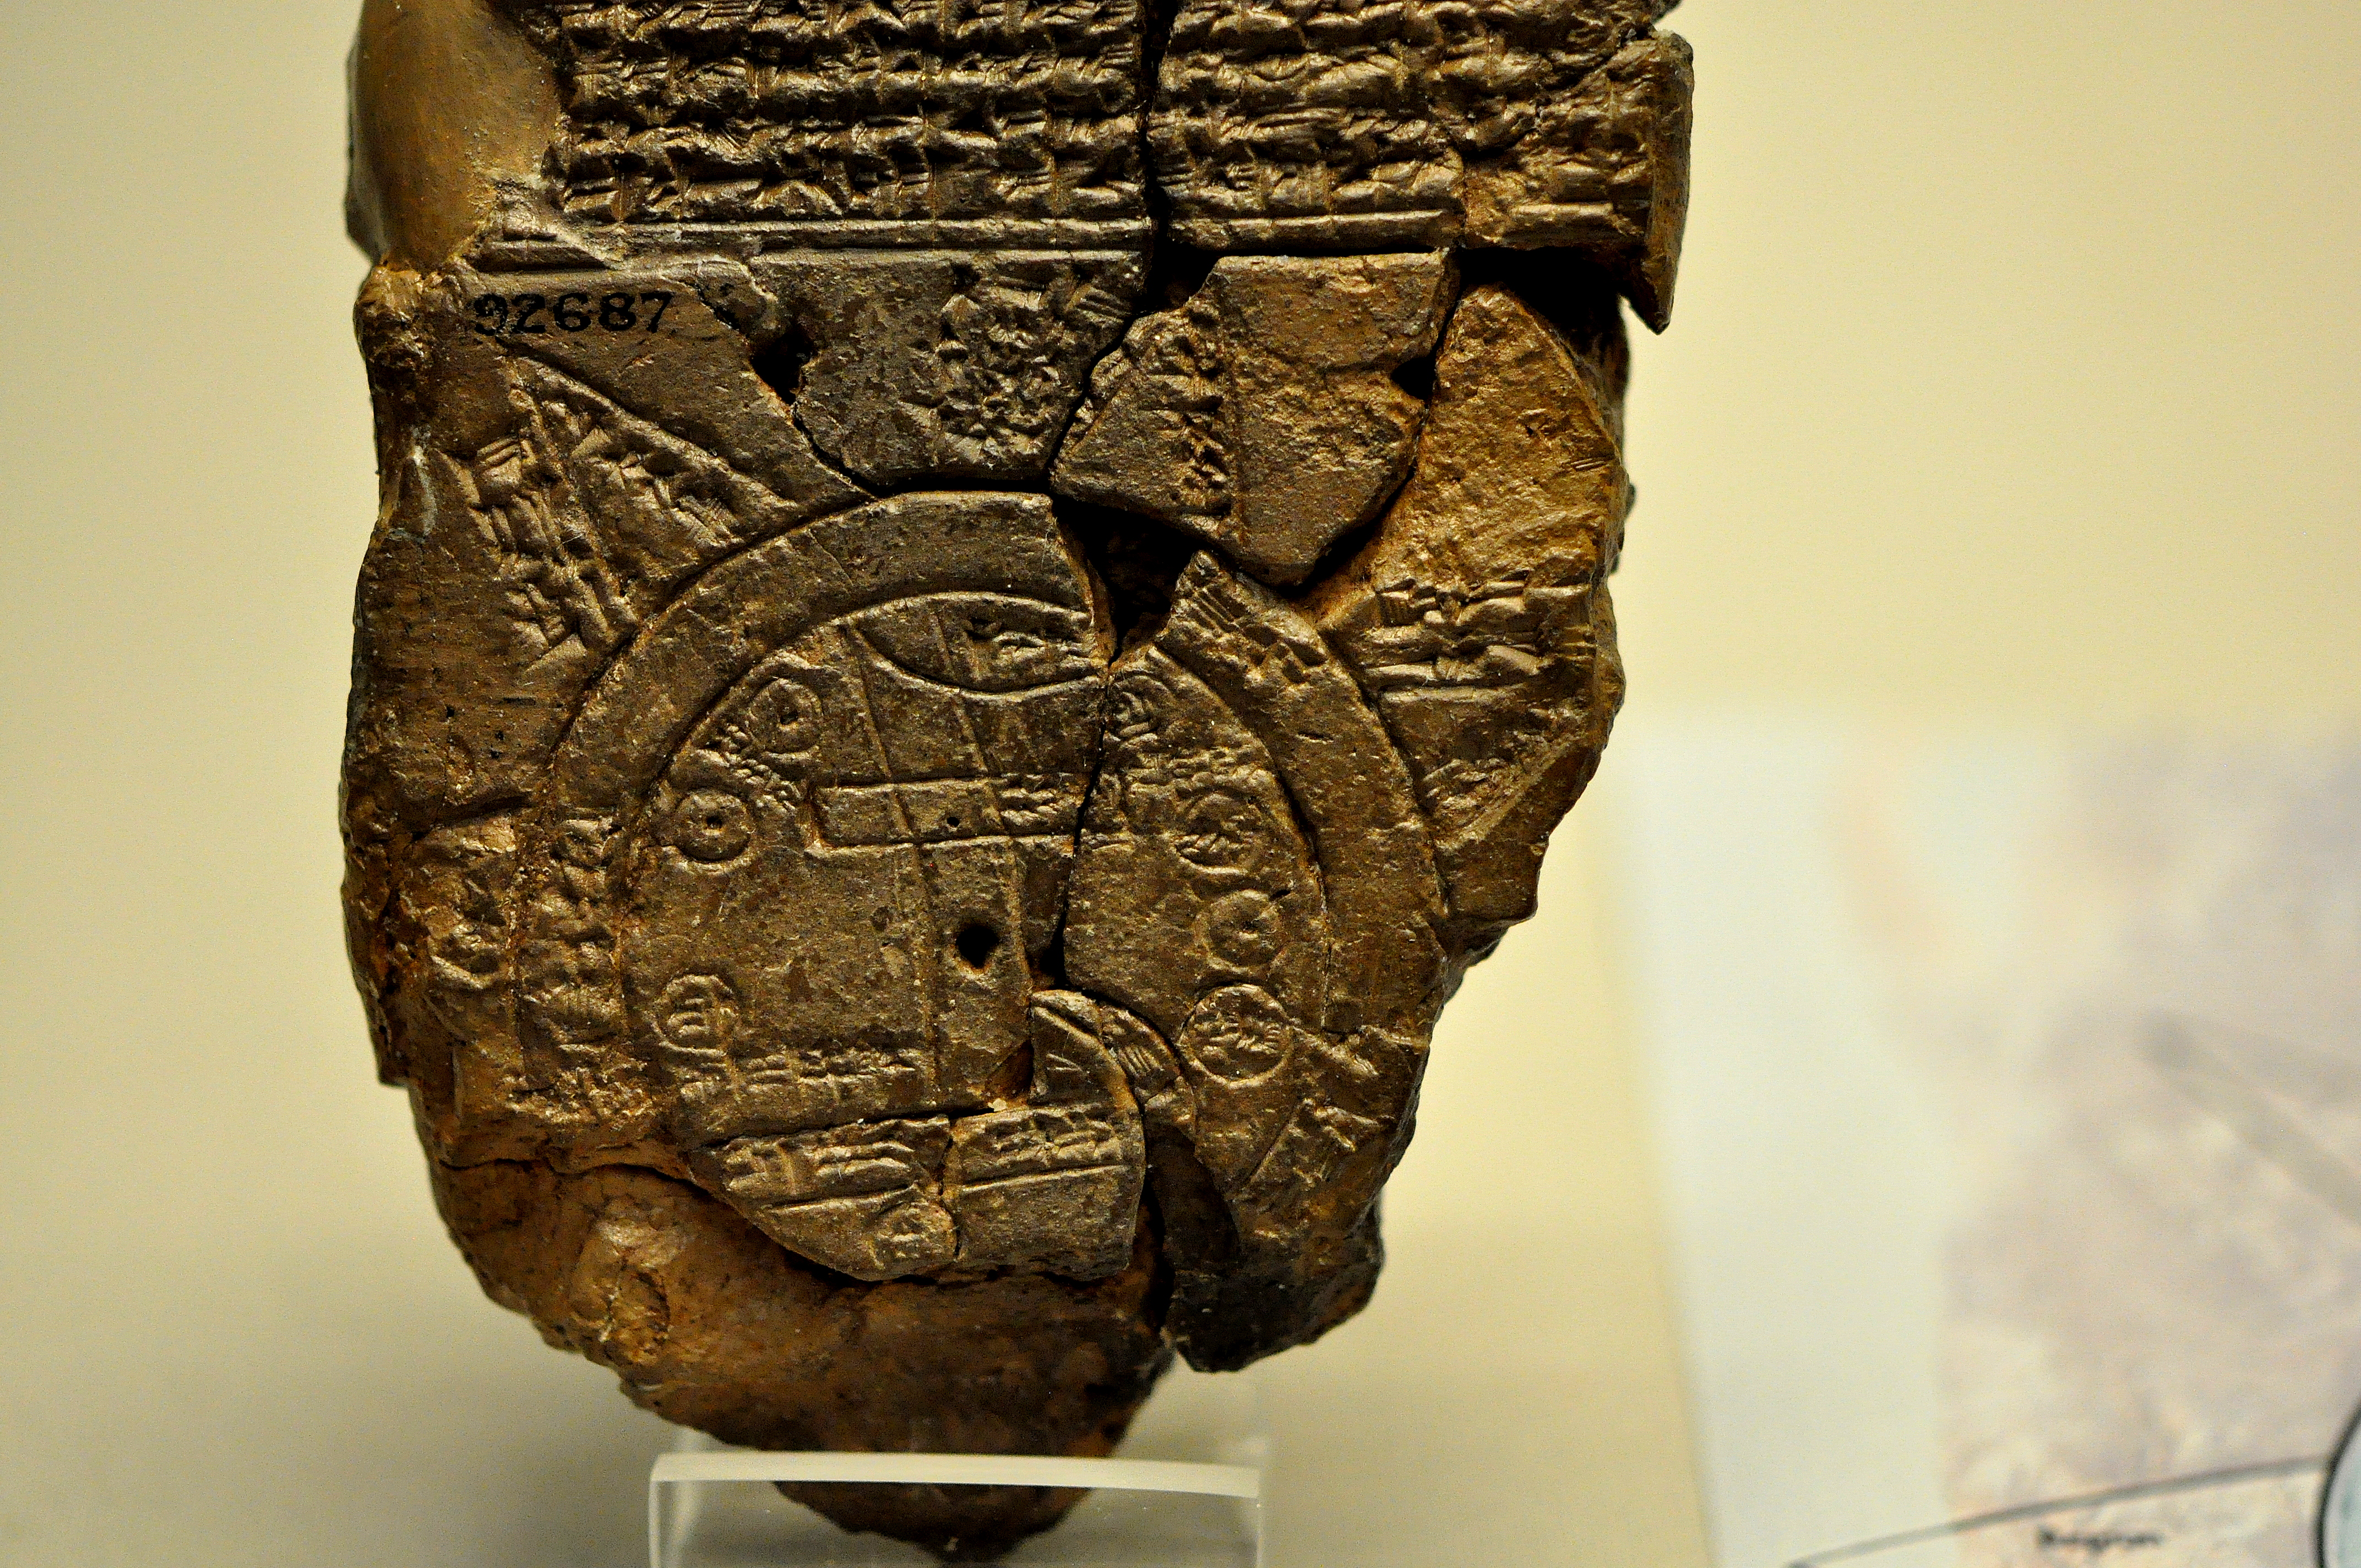 The Babylonian map of the world, from Sippar, Mesopotamia.